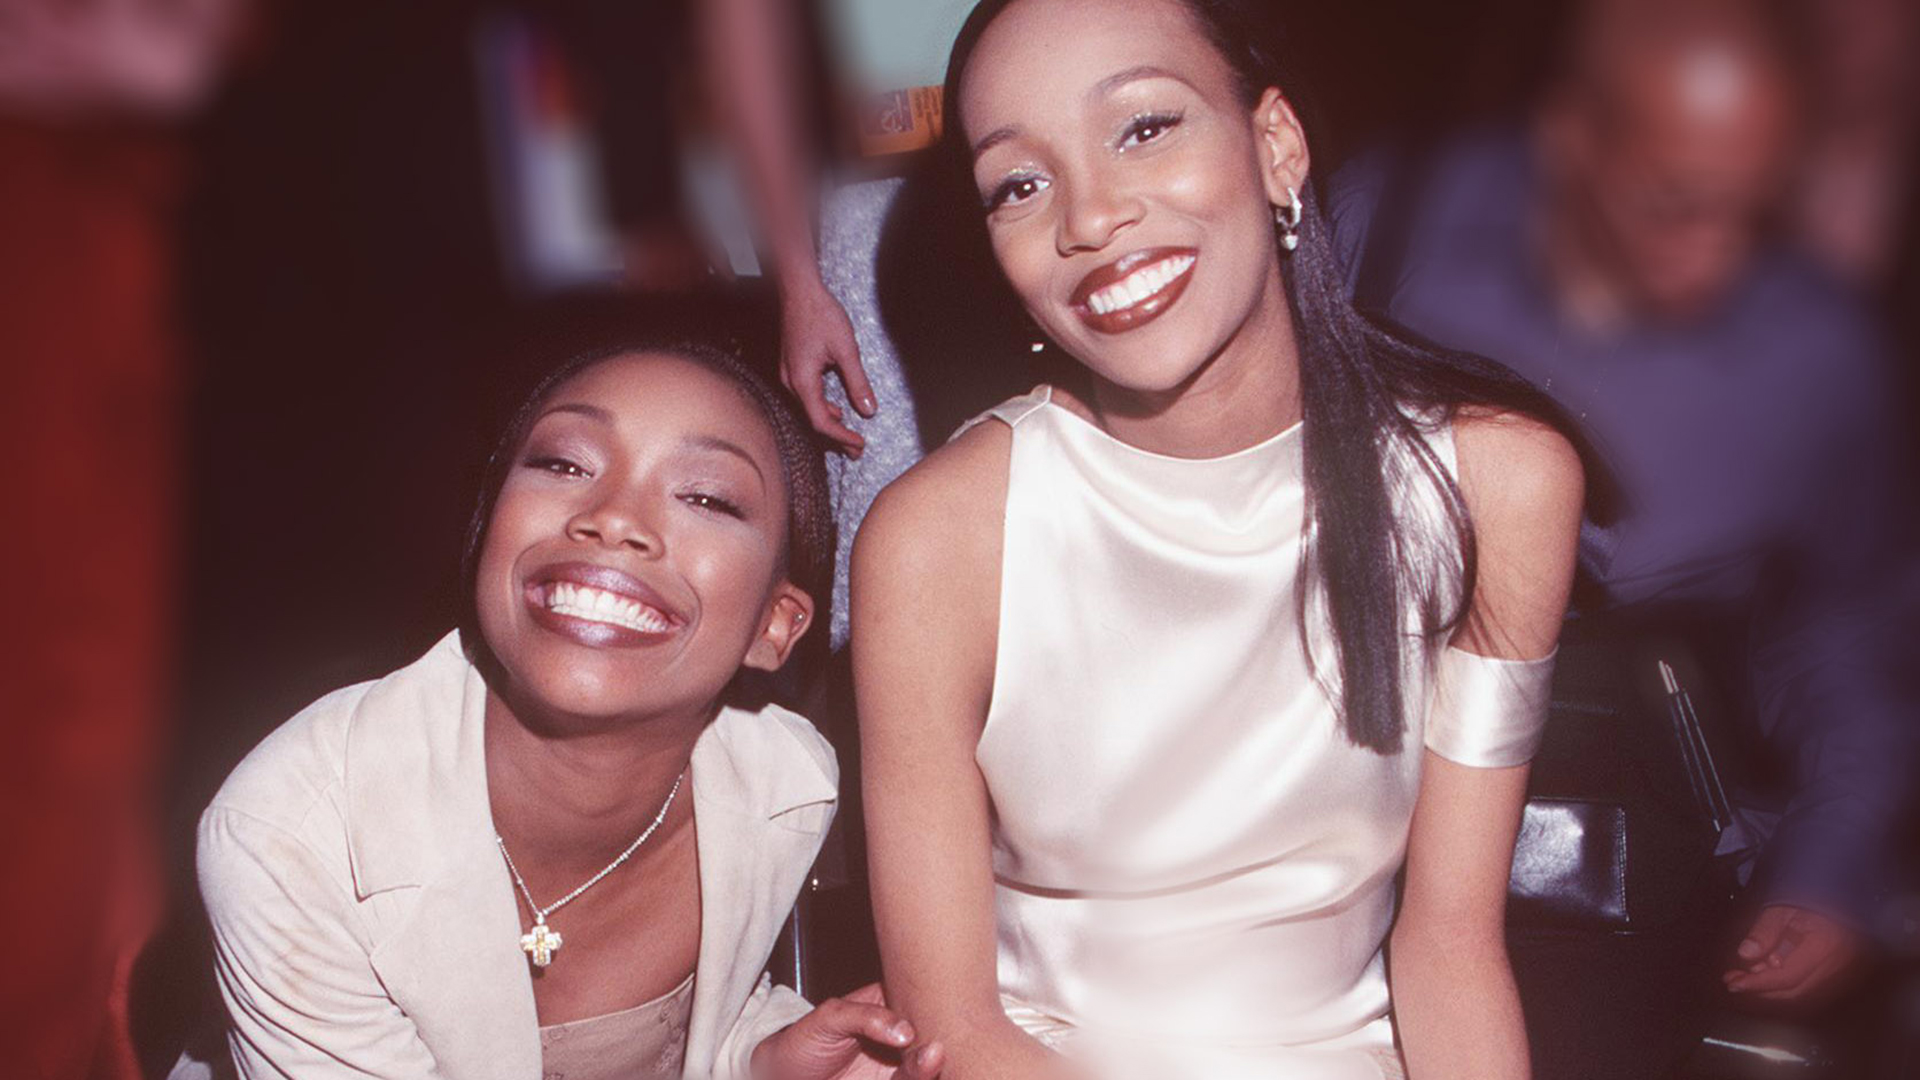 June 6, 1998: “The Boy Is Mine” by Brandy and Monica Hit No. 1 on the Billboard Hot 100